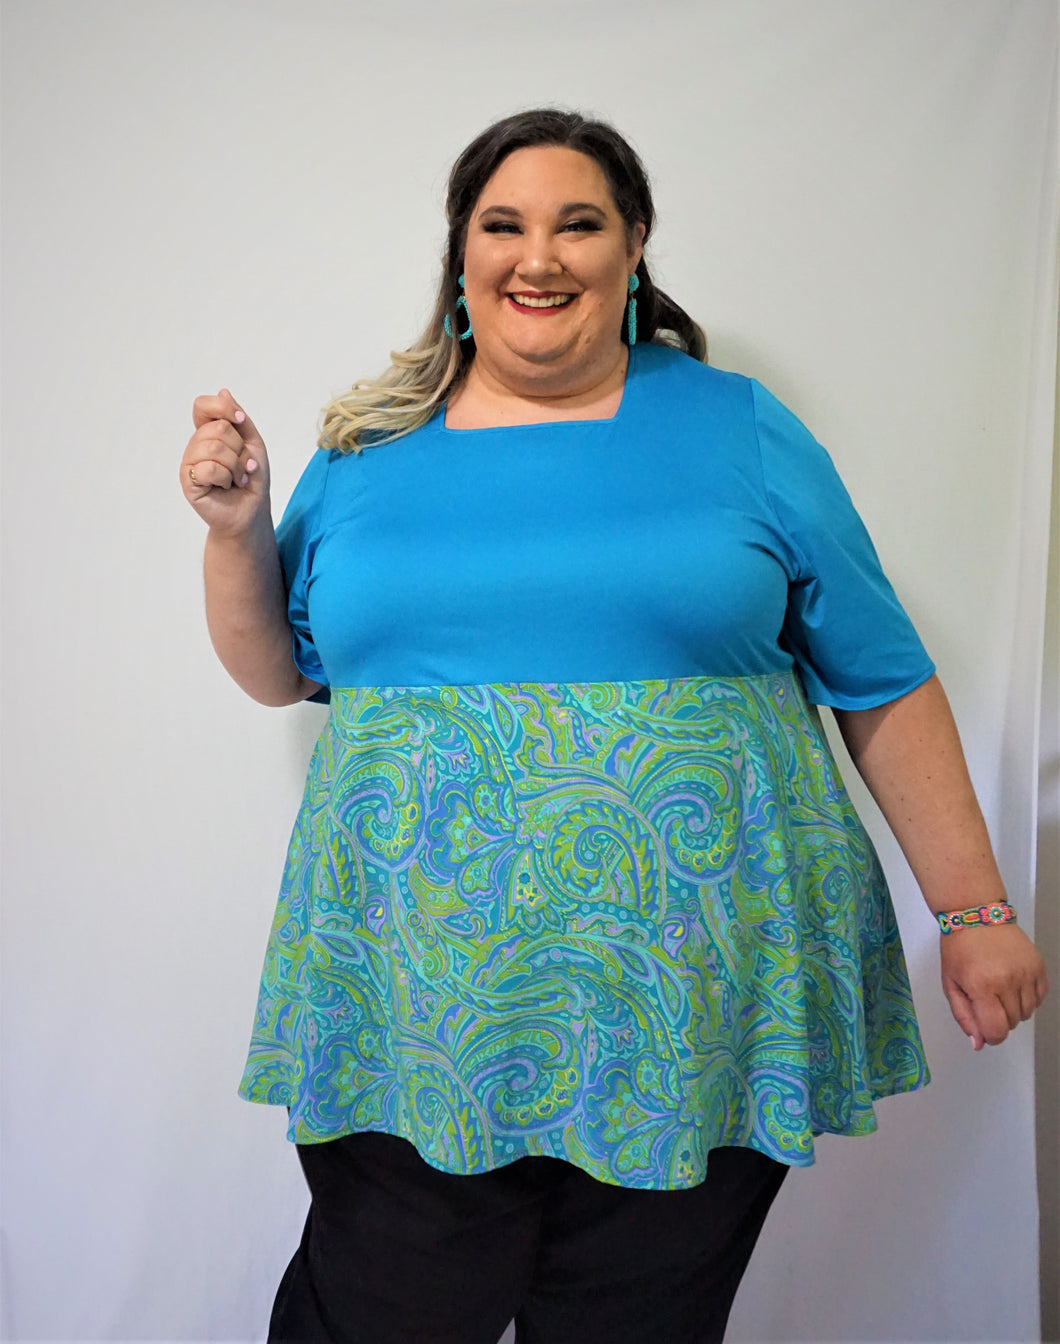 Turquoise Empire Top